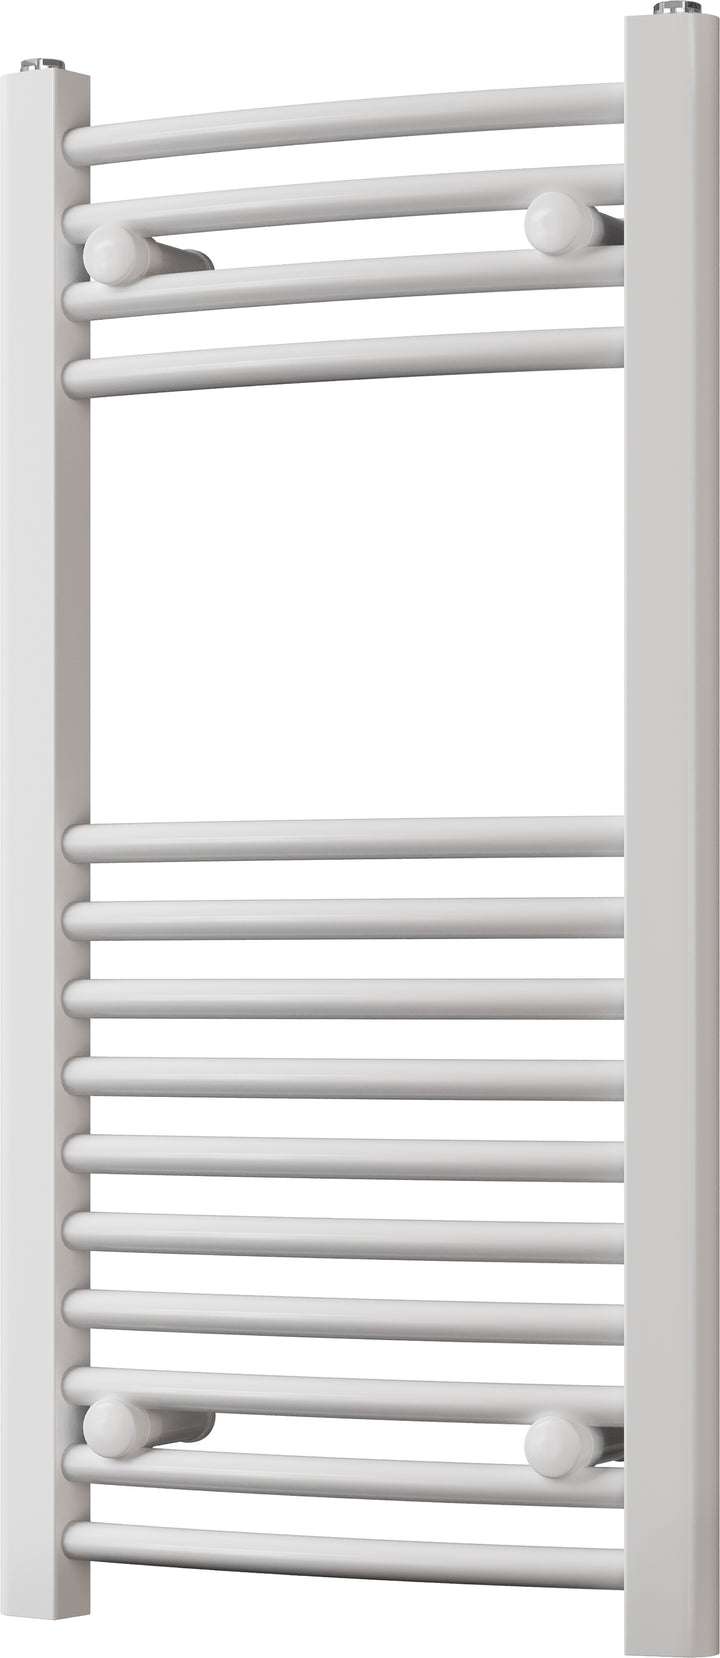 Zennor - White Heated Towel Rail - H800mm x W400mm - Curved